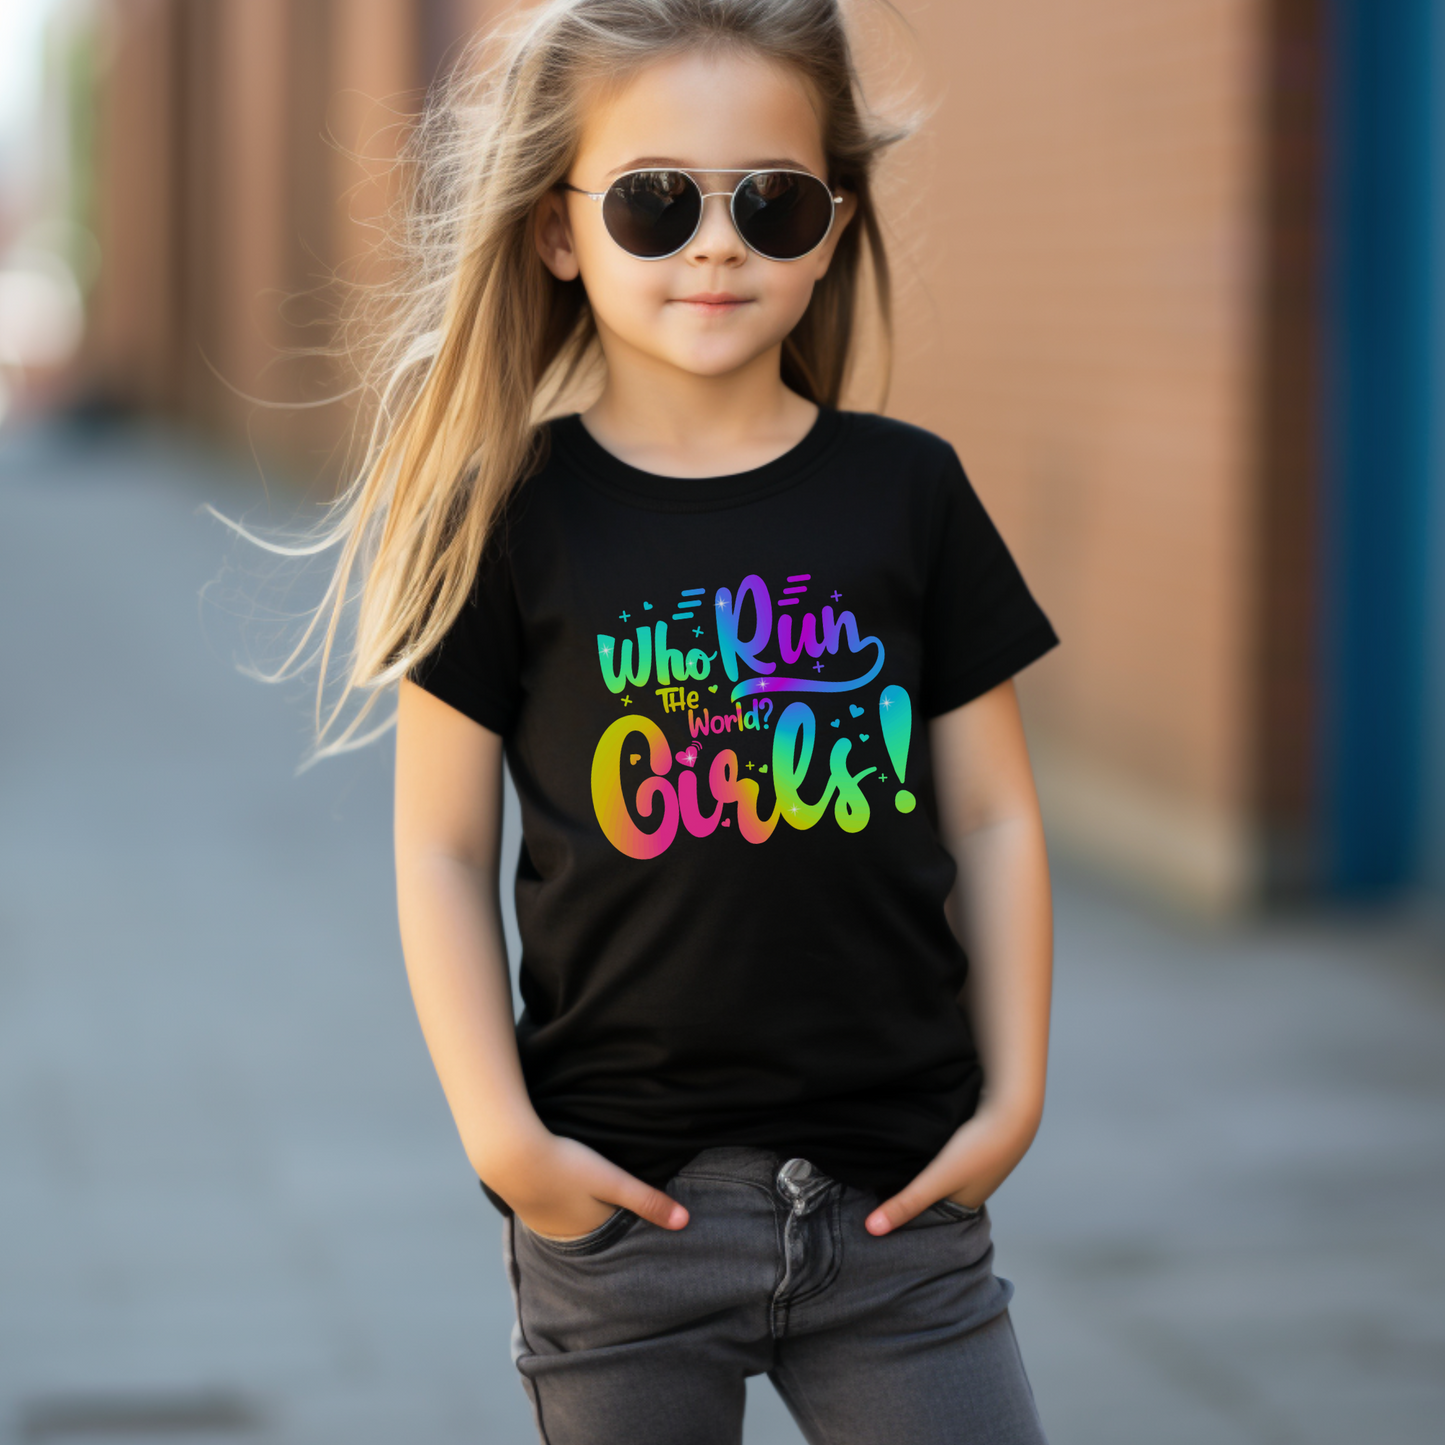 A girl wears a black short sleeved t-shirt with rainbow coloured slogan "Who run the world? Girls"